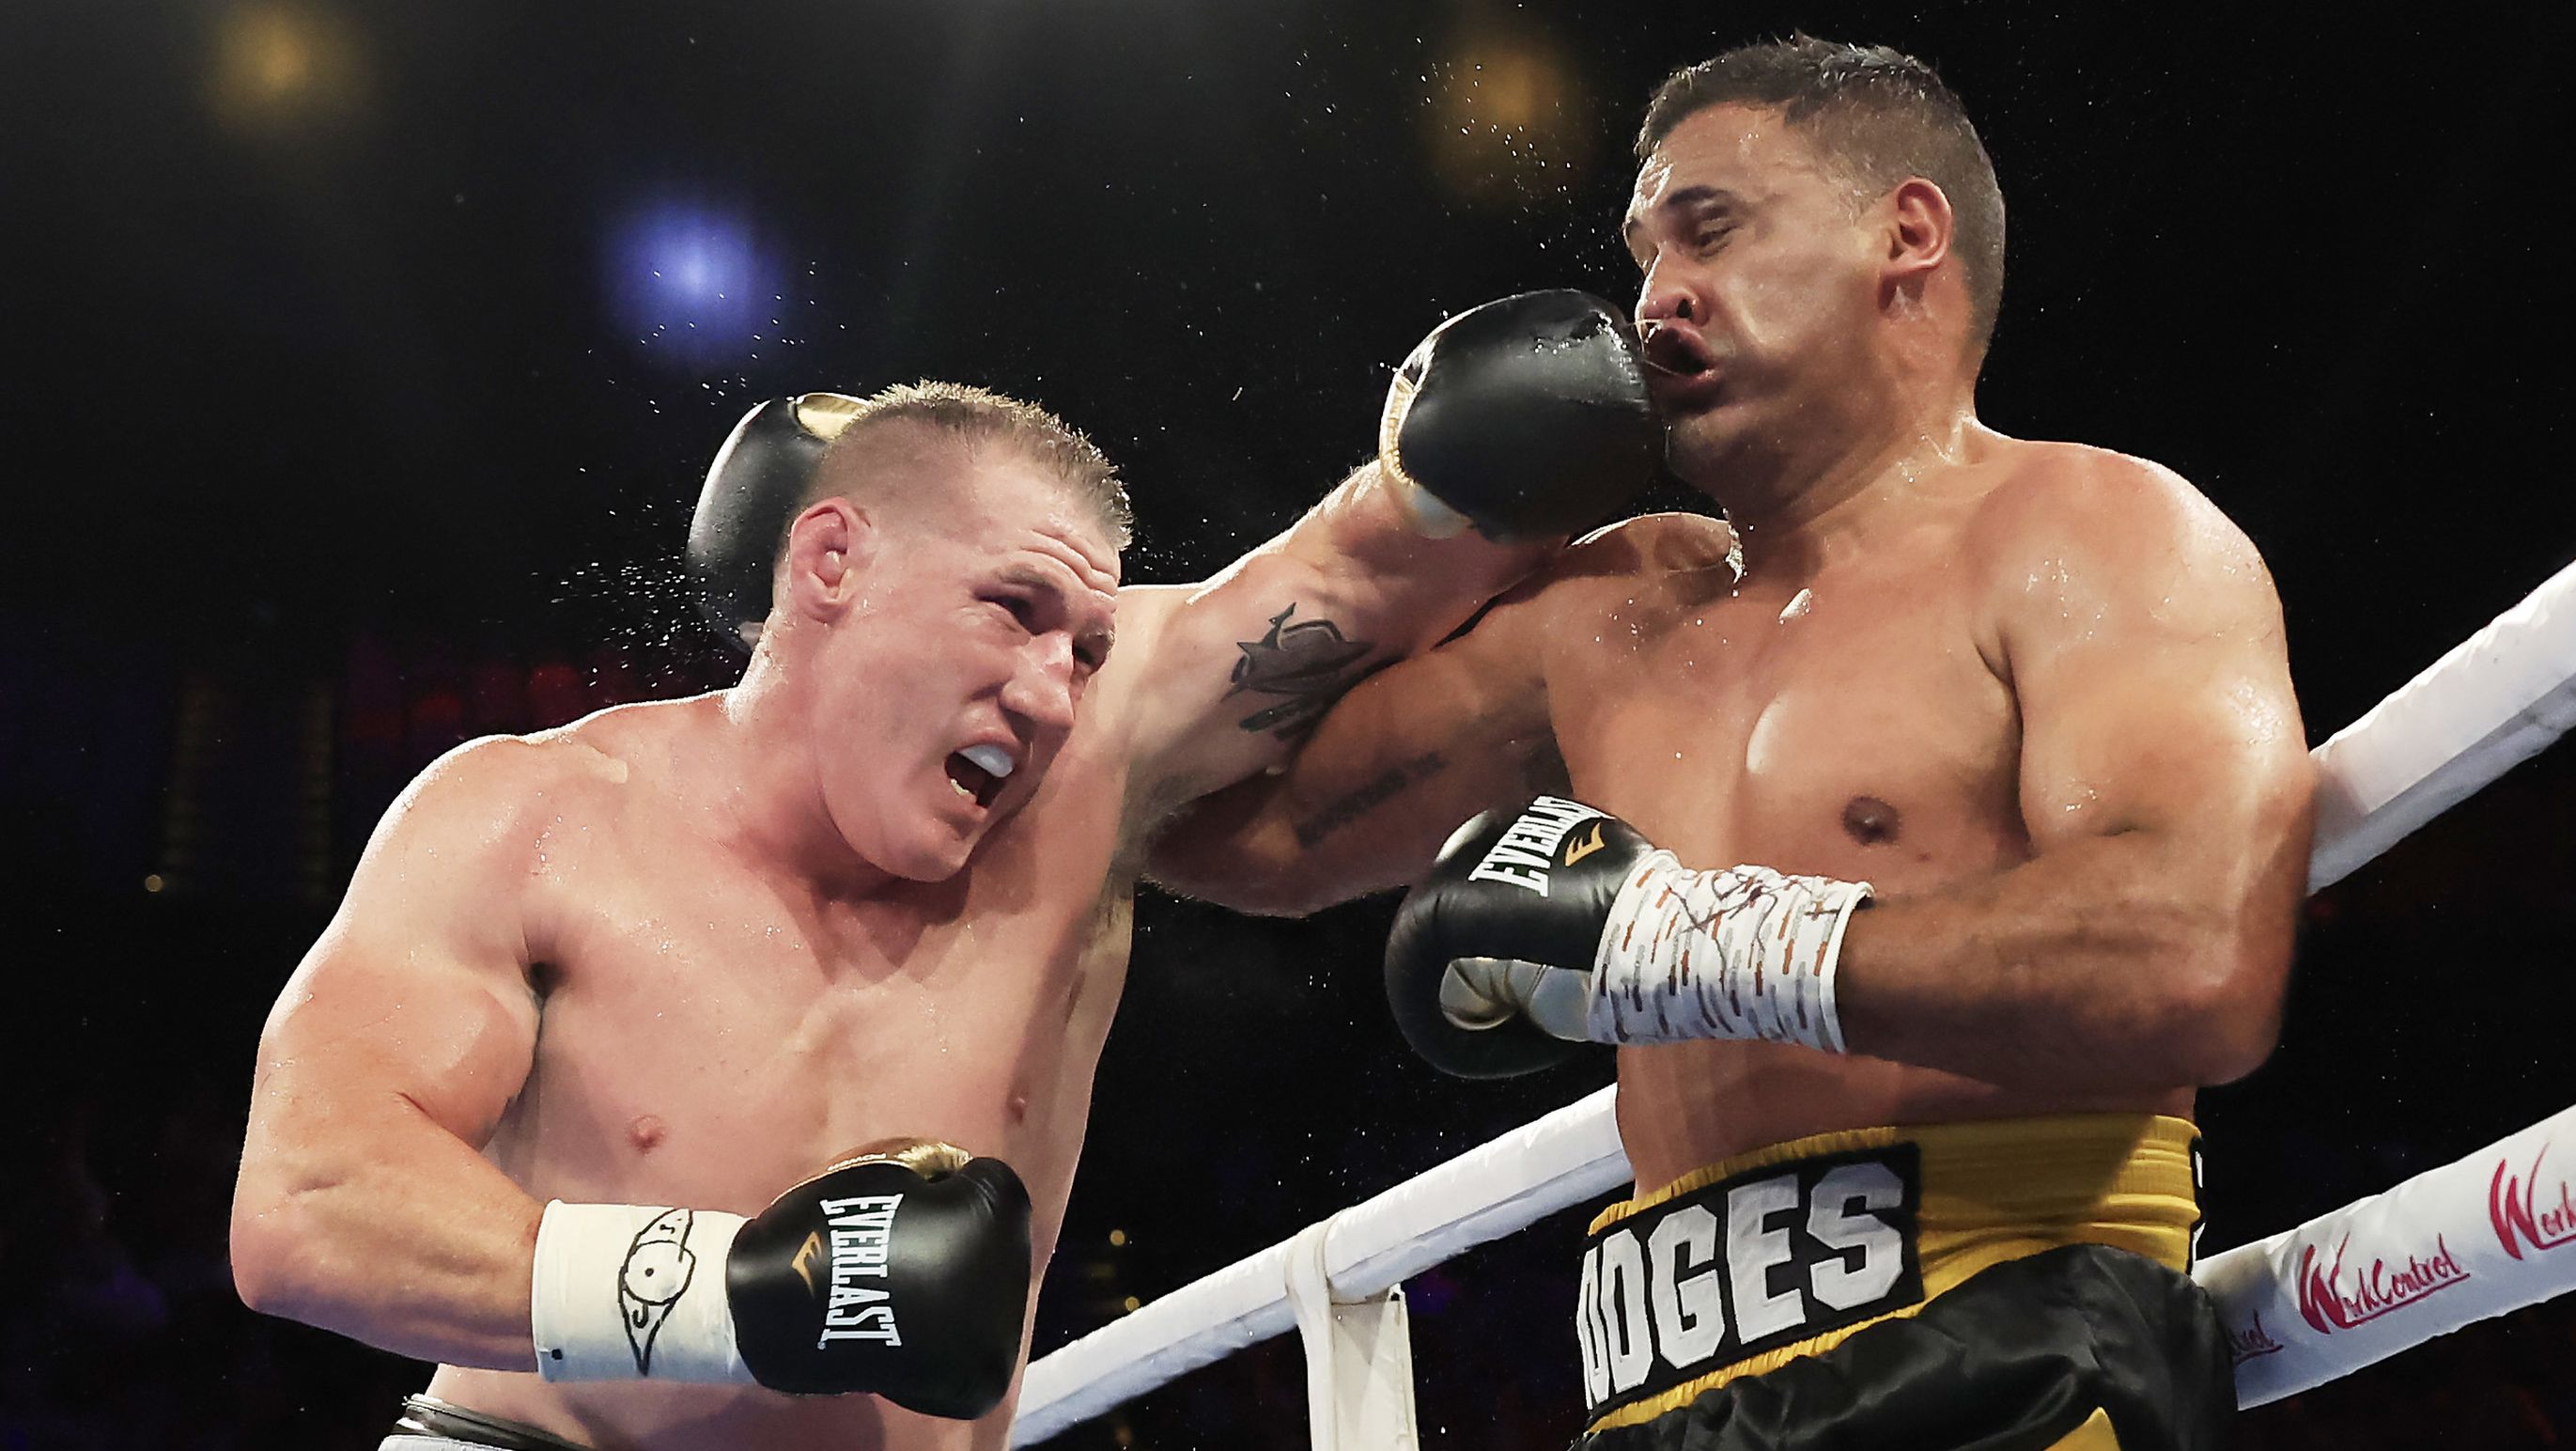 Paul Gallen throws a punch at Justin Hodges during their heavyweight fight at the Aware Super Theatre.